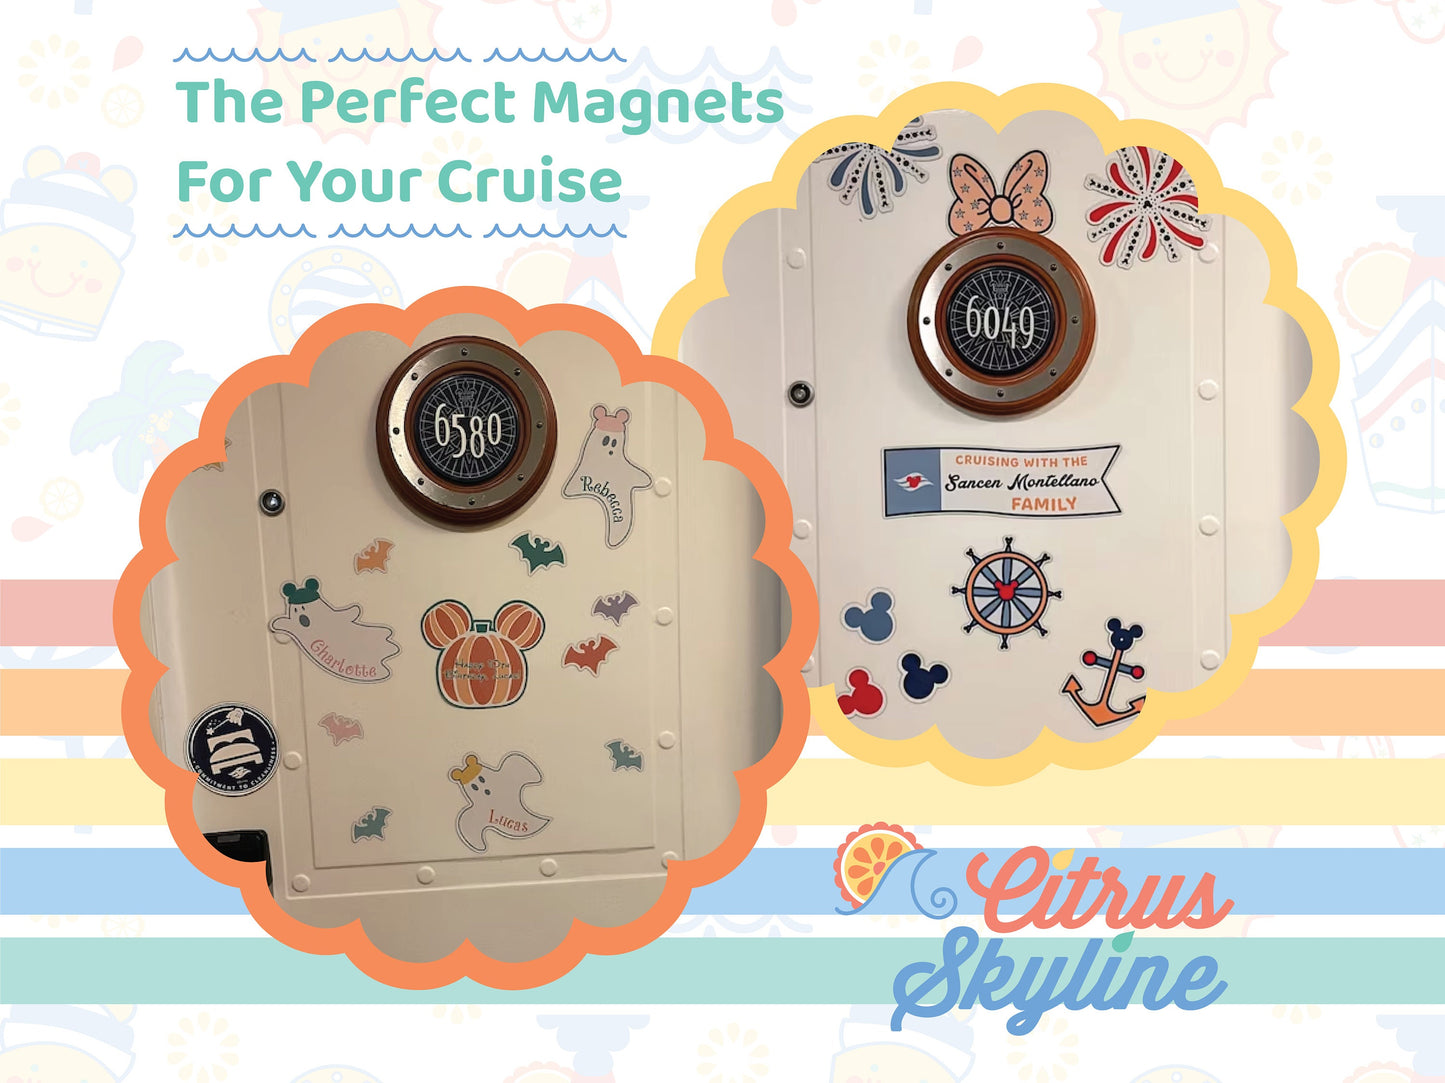 Island Cruise Magnet Pack, Royal Caribbean Cruise Magnets Set, Perfect Day Getaway, Custom Name Magnets, Sail Away Magnet, Seas The Day